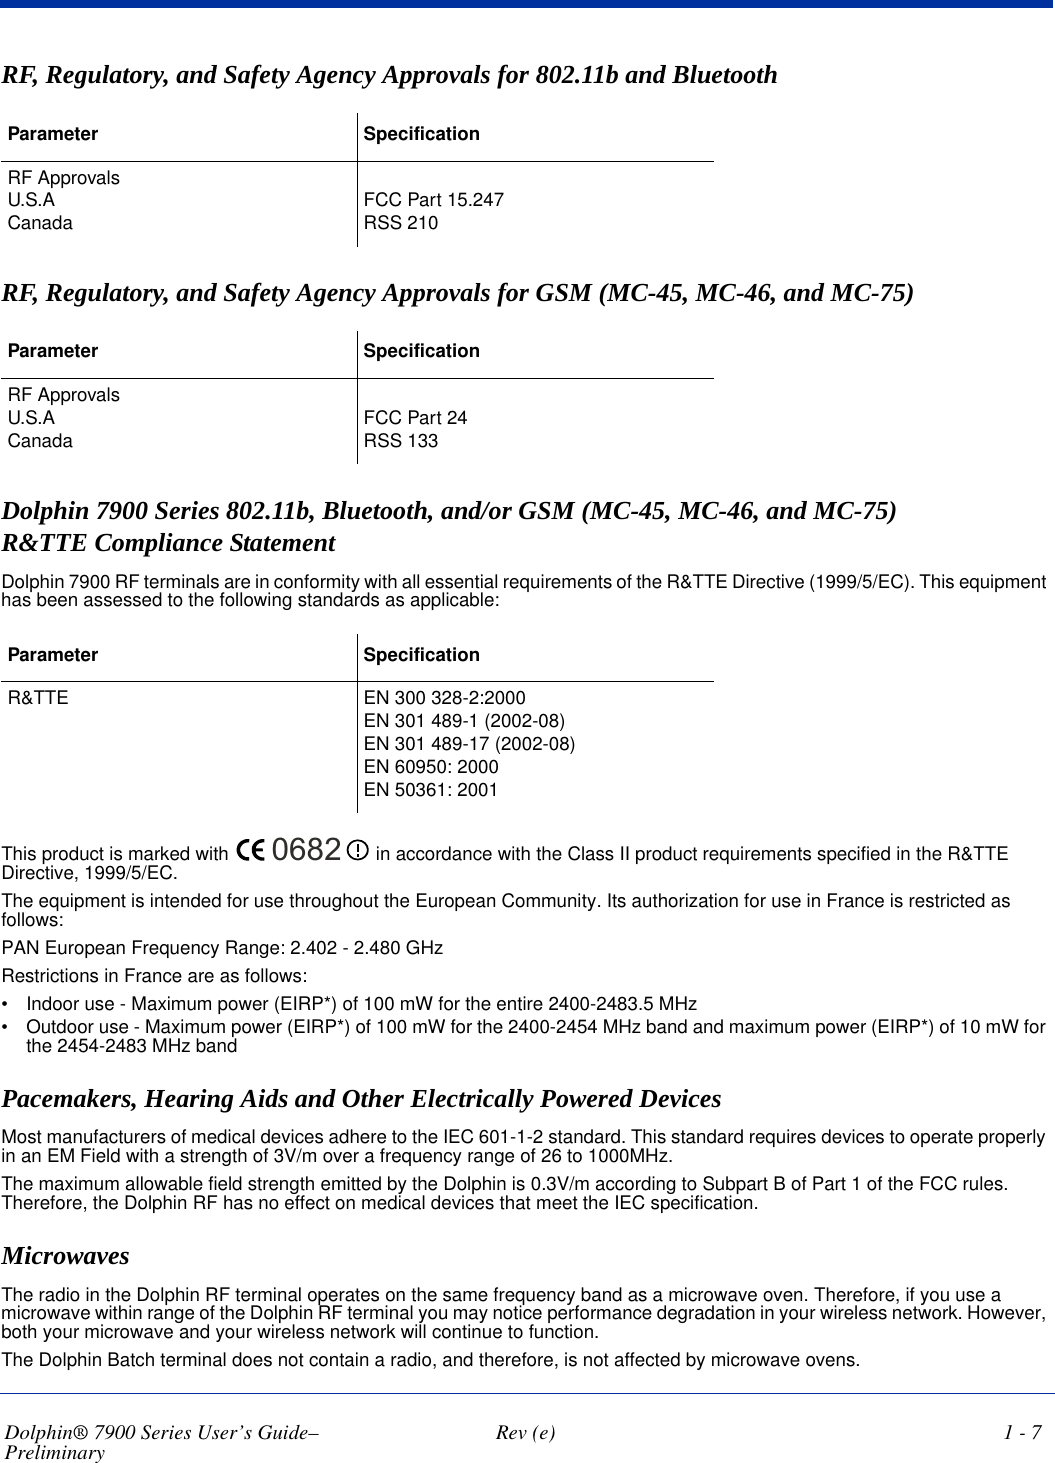 Dolphin® 7900 Series User’s Guide–Preliminary  Rev (e) 1 - 7RF, Regulatory, and Safety Agency Approvals for 802.11b and Bluetooth Parameter SpecificationRF ApprovalsU.S.ACanada FCC Part 15.247RSS 210 RF, Regulatory, and Safety Agency Approvals for GSM (MC-45, MC-46, and MC-75)Parameter SpecificationRF ApprovalsU.S.ACanada FCC Part 24RSS 133Dolphin 7900 Series 802.11b, Bluetooth, and/or GSM (MC-45, MC-46, and MC-75) R&amp;TTE Compliance StatementDolphin 7900 RF terminals are in conformity with all essential requirements of the R&amp;TTE Directive (1999/5/EC). This equipment has been assessed to the following standards as applicable:Parameter SpecificationR&amp;TTE EN 300 328-2:2000EN 301 489-1 (2002-08)EN 301 489-17 (2002-08)EN 60950: 2000EN 50361: 2001This product is marked with  in accordance with the Class II product requirements specified in the R&amp;TTE Directive, 1999/5/EC. The equipment is intended for use throughout the European Community. Its authorization for use in France is restricted as follows:PAN European Frequency Range: 2.402 - 2.480 GHzRestrictions in France are as follows: •           Indoor use - Maximum power (EIRP*) of 100 mW for the entire 2400-2483.5 MHz •           Outdoor use - Maximum power (EIRP*) of 100 mW for the 2400-2454 MHz band and maximum power (EIRP*) of 10 mW for the 2454-2483 MHz bandPacemakers, Hearing Aids and Other Electrically Powered DevicesMost manufacturers of medical devices adhere to the IEC 601-1-2 standard. This standard requires devices to operate properly in an EM Field with a strength of 3V/m over a frequency range of 26 to 1000MHz. The maximum allowable field strength emitted by the Dolphin is 0.3V/m according to Subpart B of Part 1 of the FCC rules. Therefore, the Dolphin RF has no effect on medical devices that meet the IEC specification. MicrowavesThe radio in the Dolphin RF terminal operates on the same frequency band as a microwave oven. Therefore, if you use a microwave within range of the Dolphin RF terminal you may notice performance degradation in your wireless network. However, both your microwave and your wireless network will continue to function.The Dolphin Batch terminal does not contain a radio, and therefore, is not affected by microwave ovens.